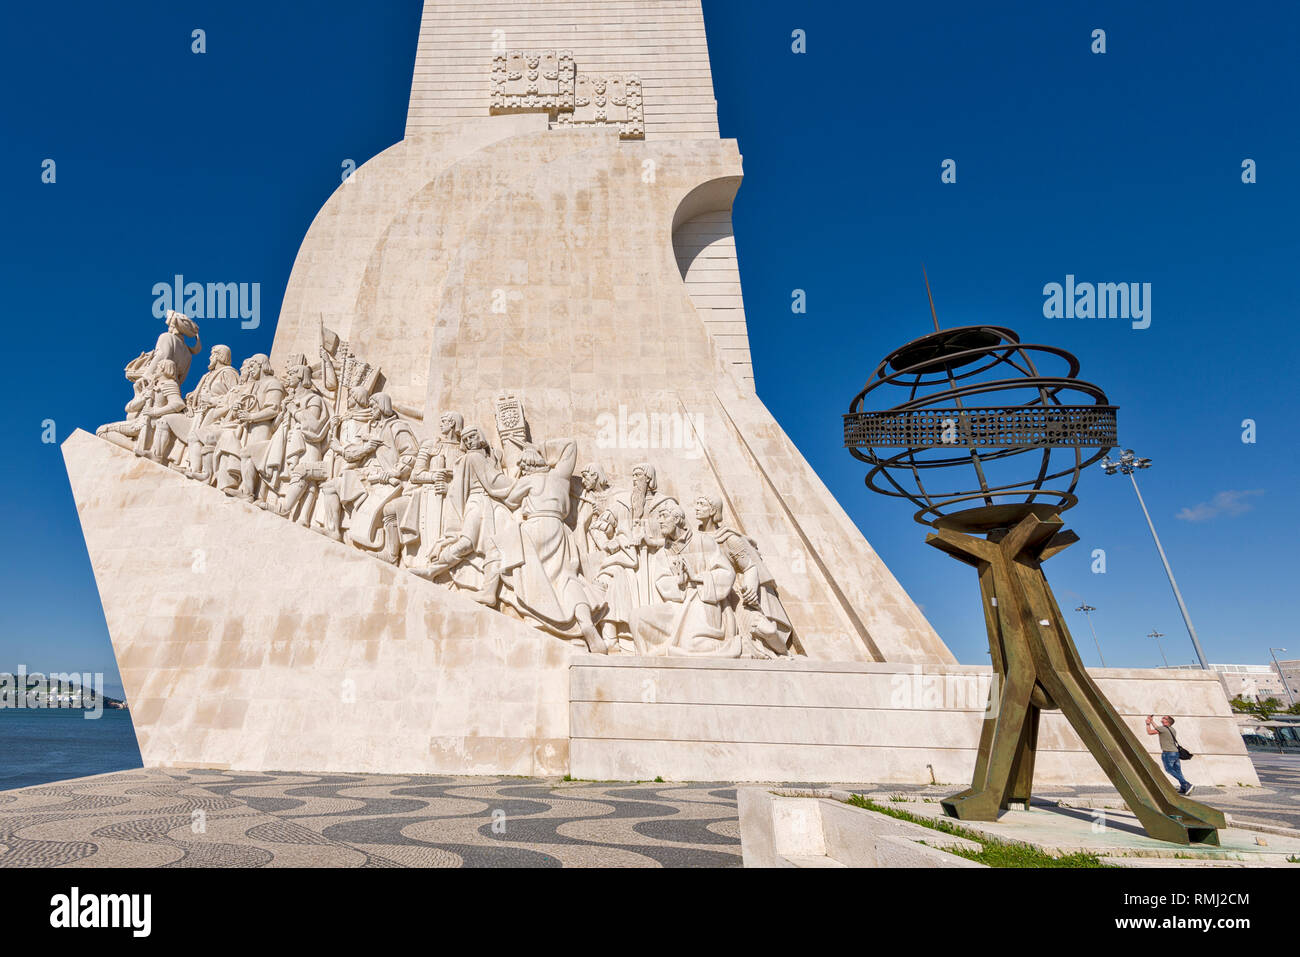 Padrao dos Descobrimentos, Monument to the Discoveries in Belem, Lisbon, Portugal Stock Photo